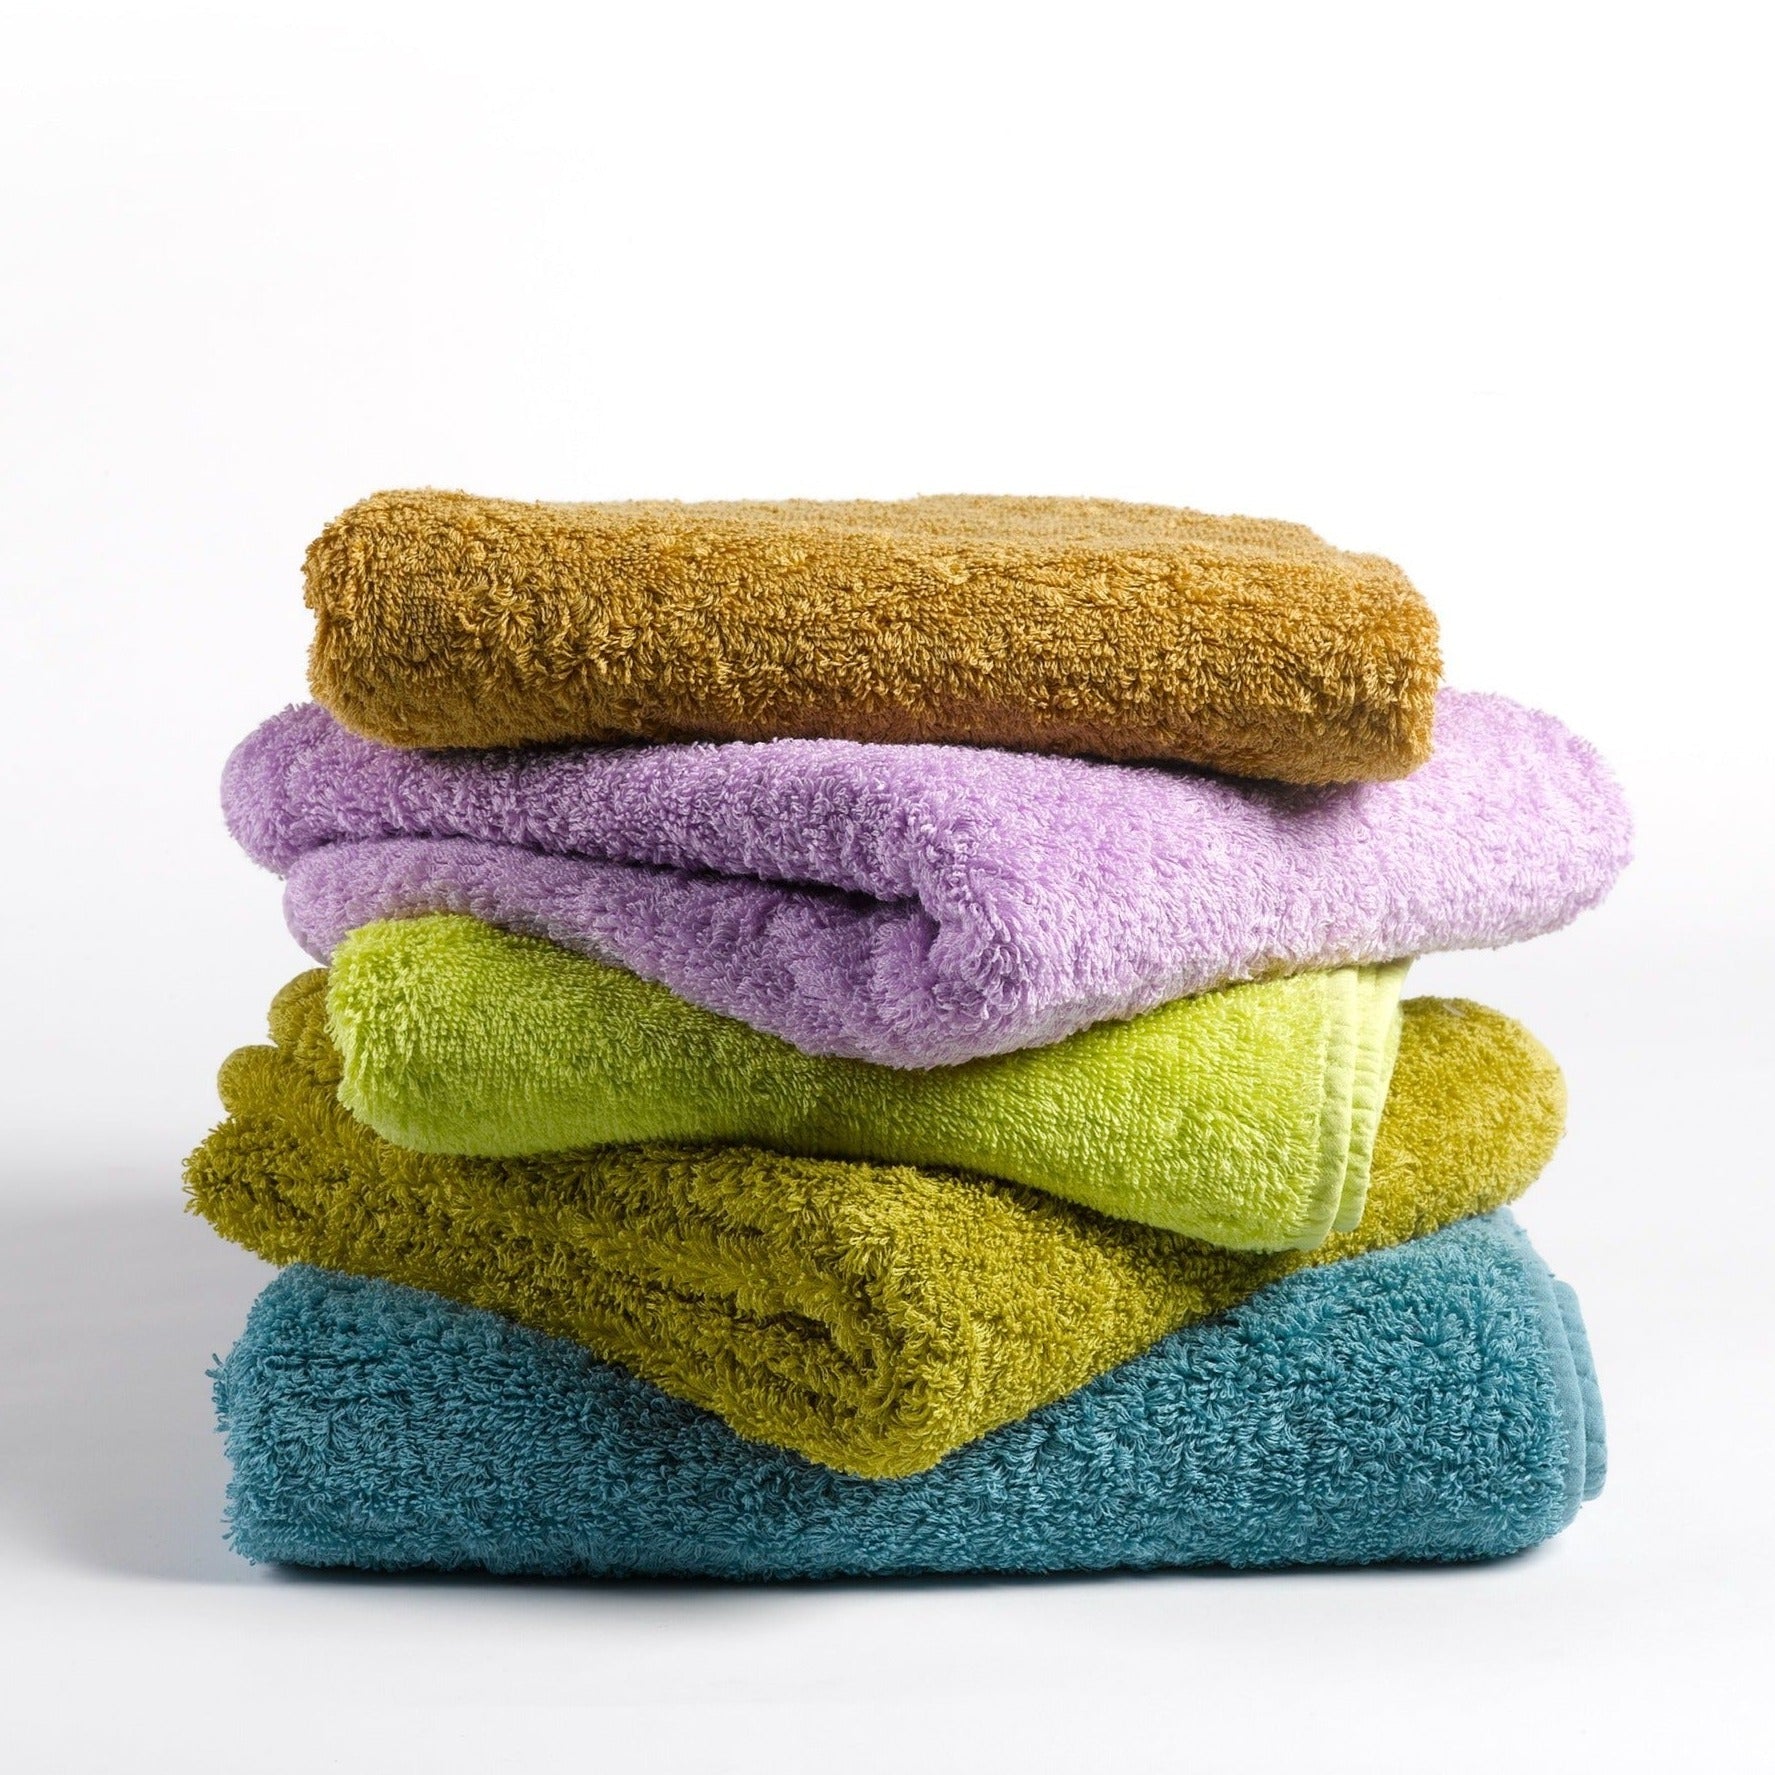 Abyss & Habidecor Super Pile Towels - 0